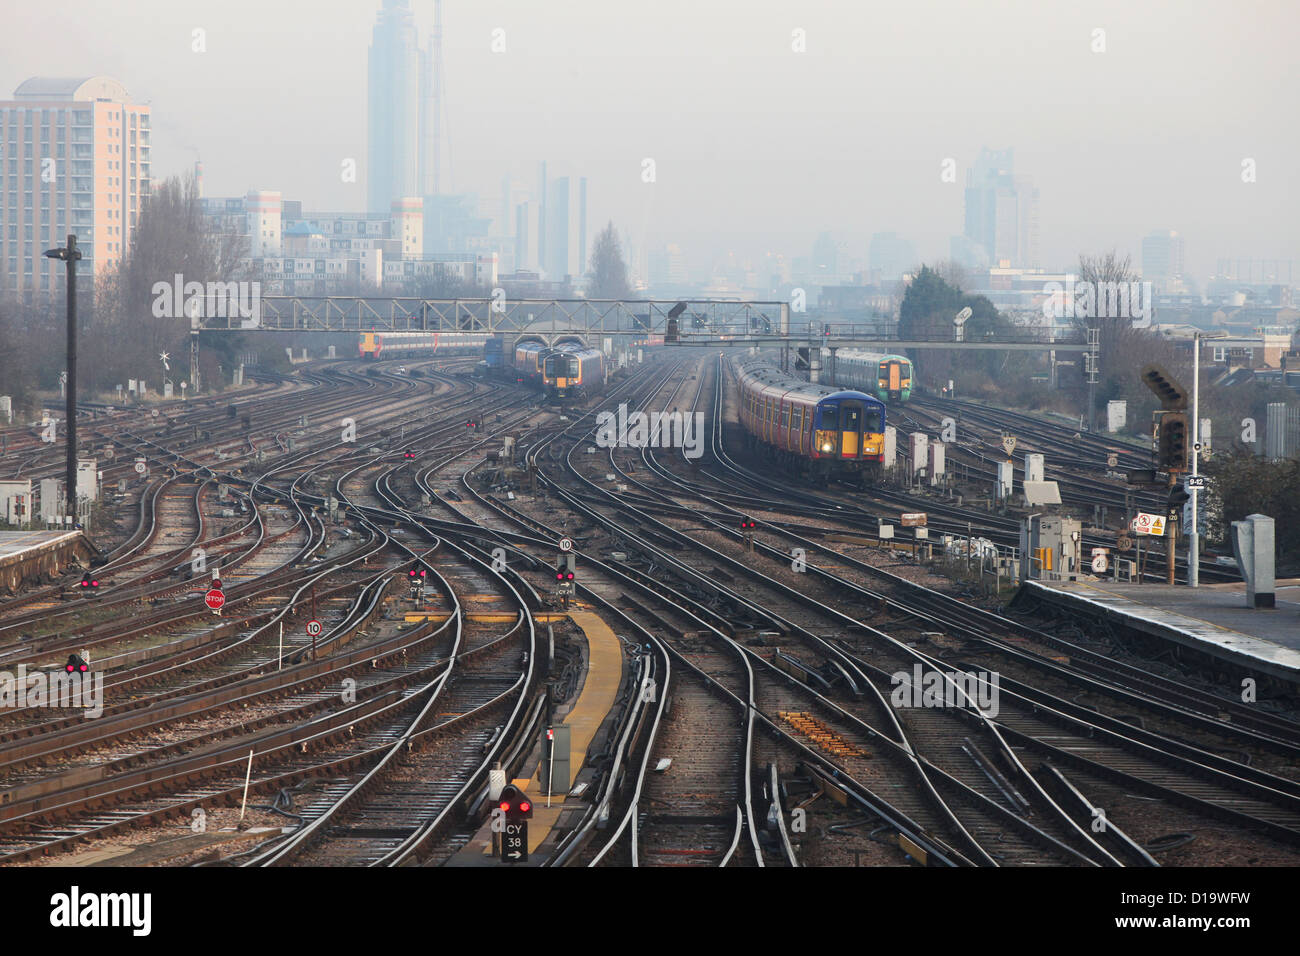 Trains approach and depart from Clapham Junction station in London. Stock Photo